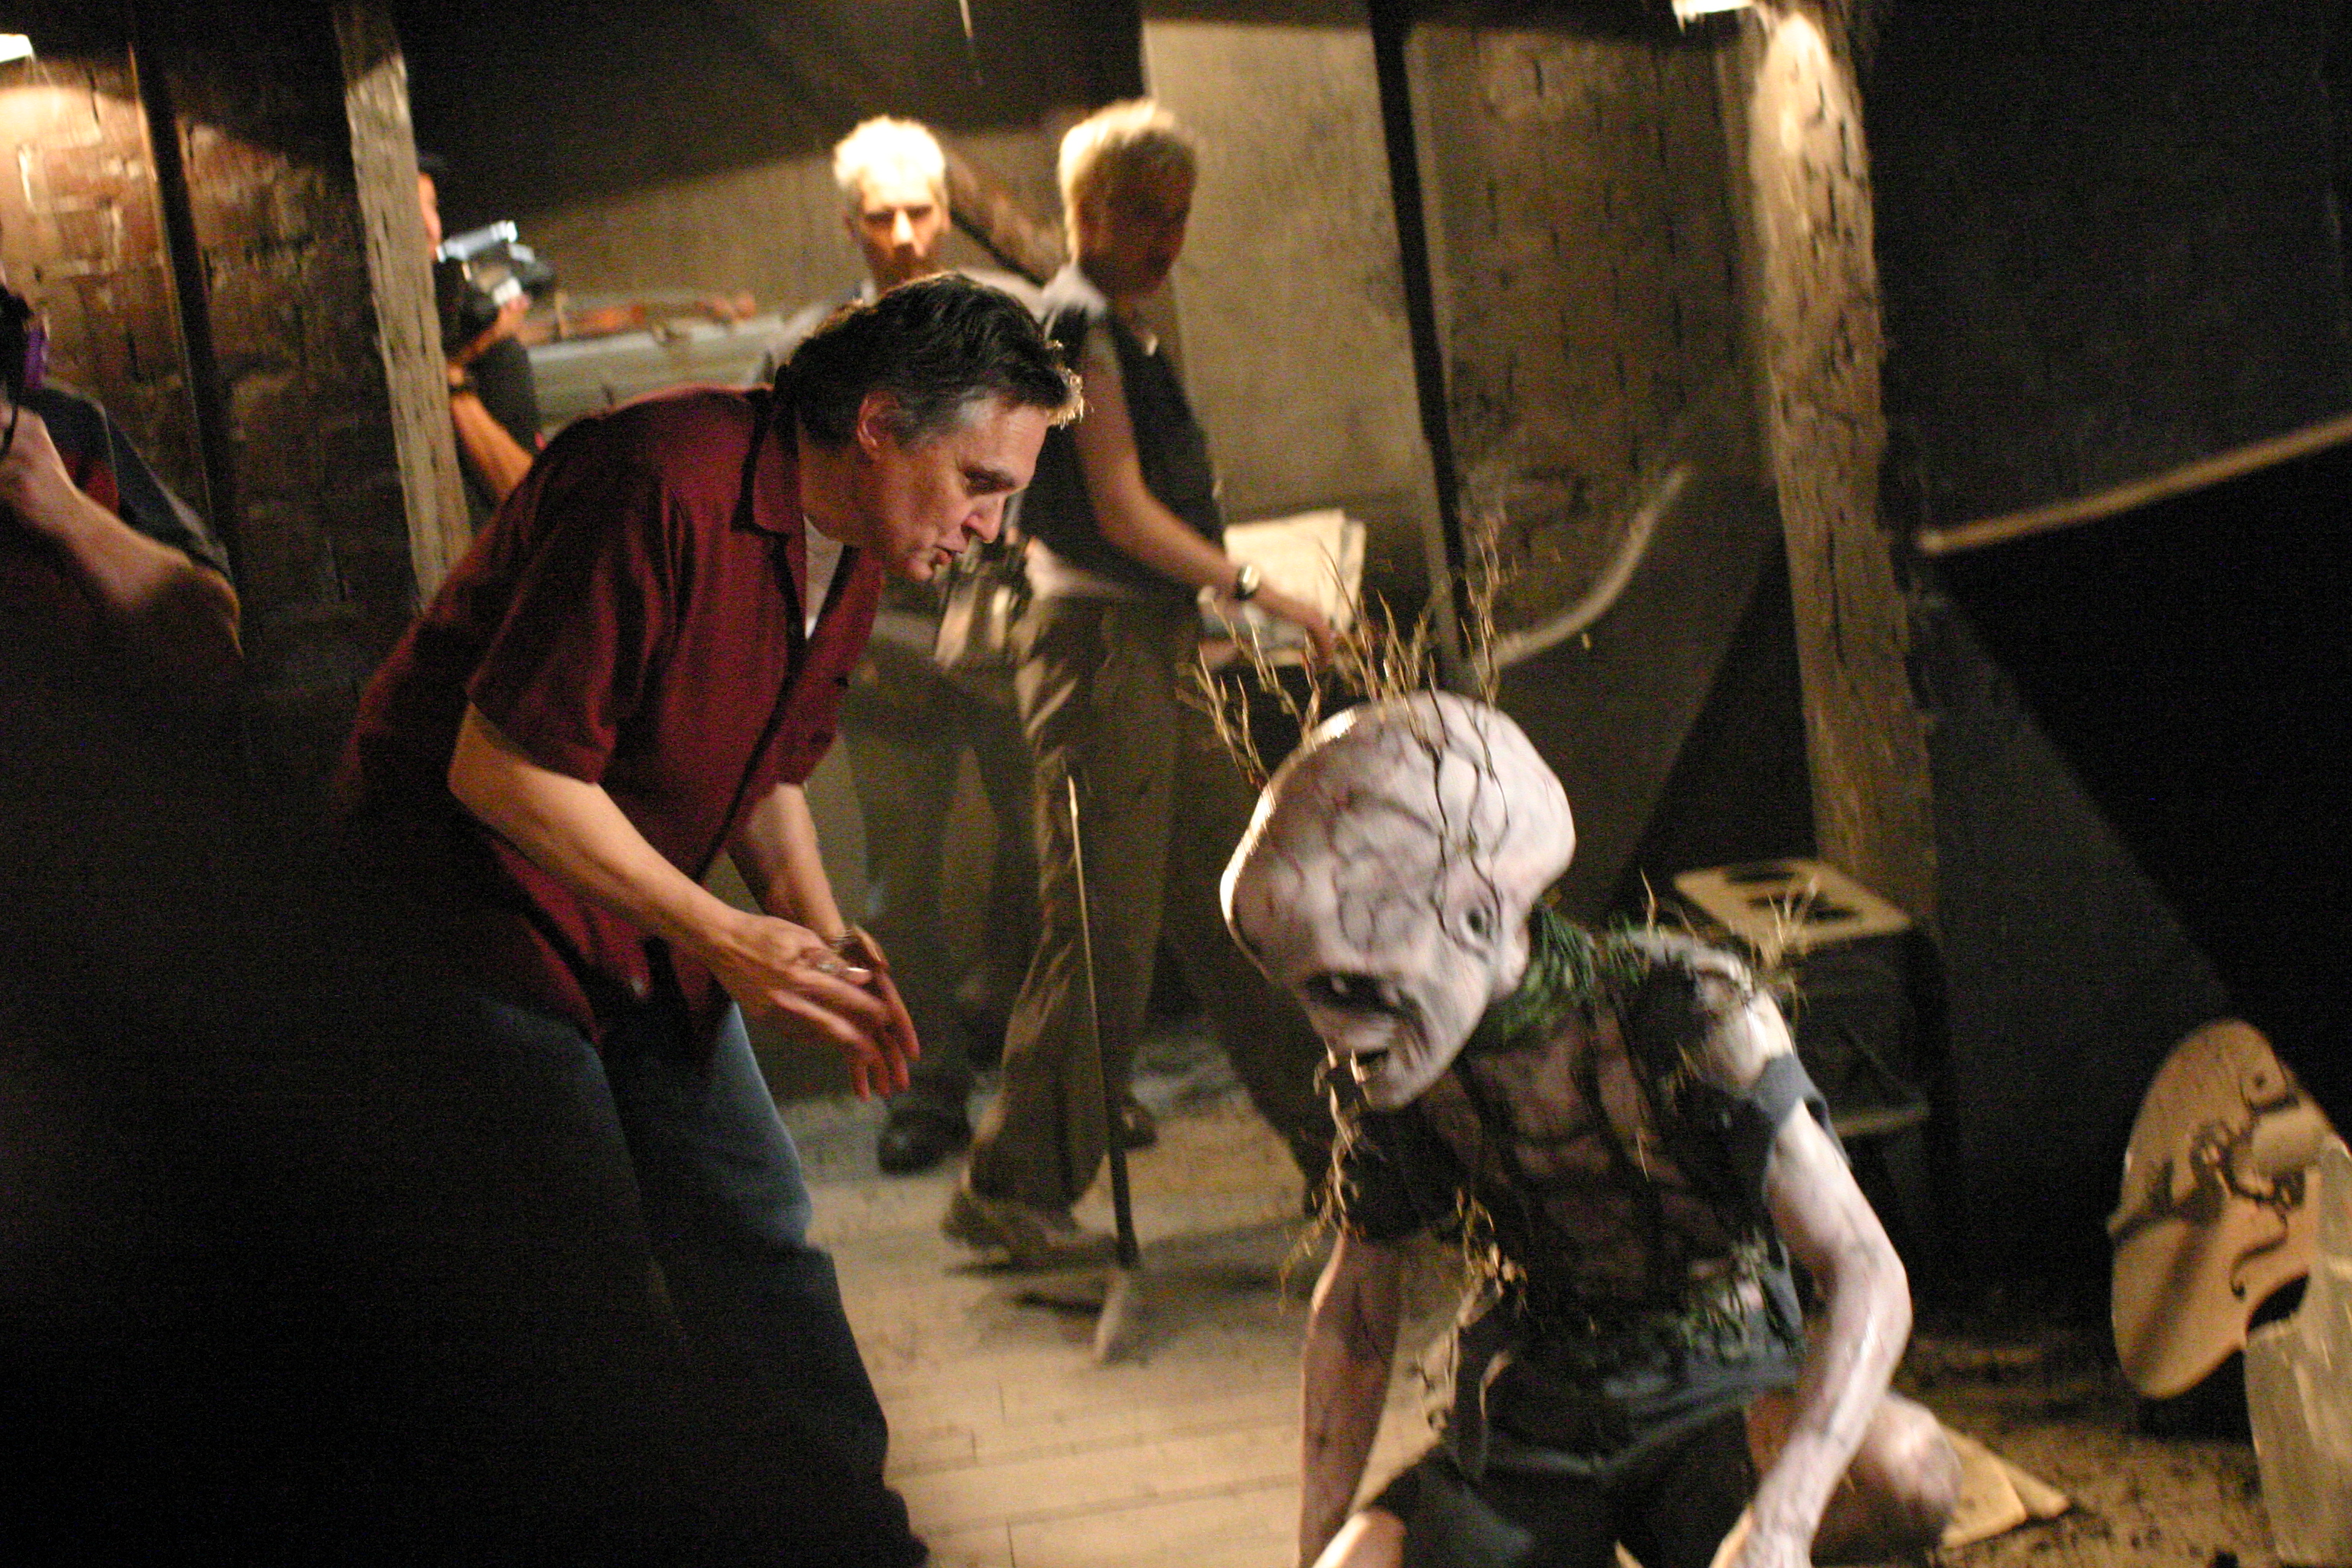 William Malone discusses the finer points of being a creature with Johnny (Walter Phelan) Masters of Horror